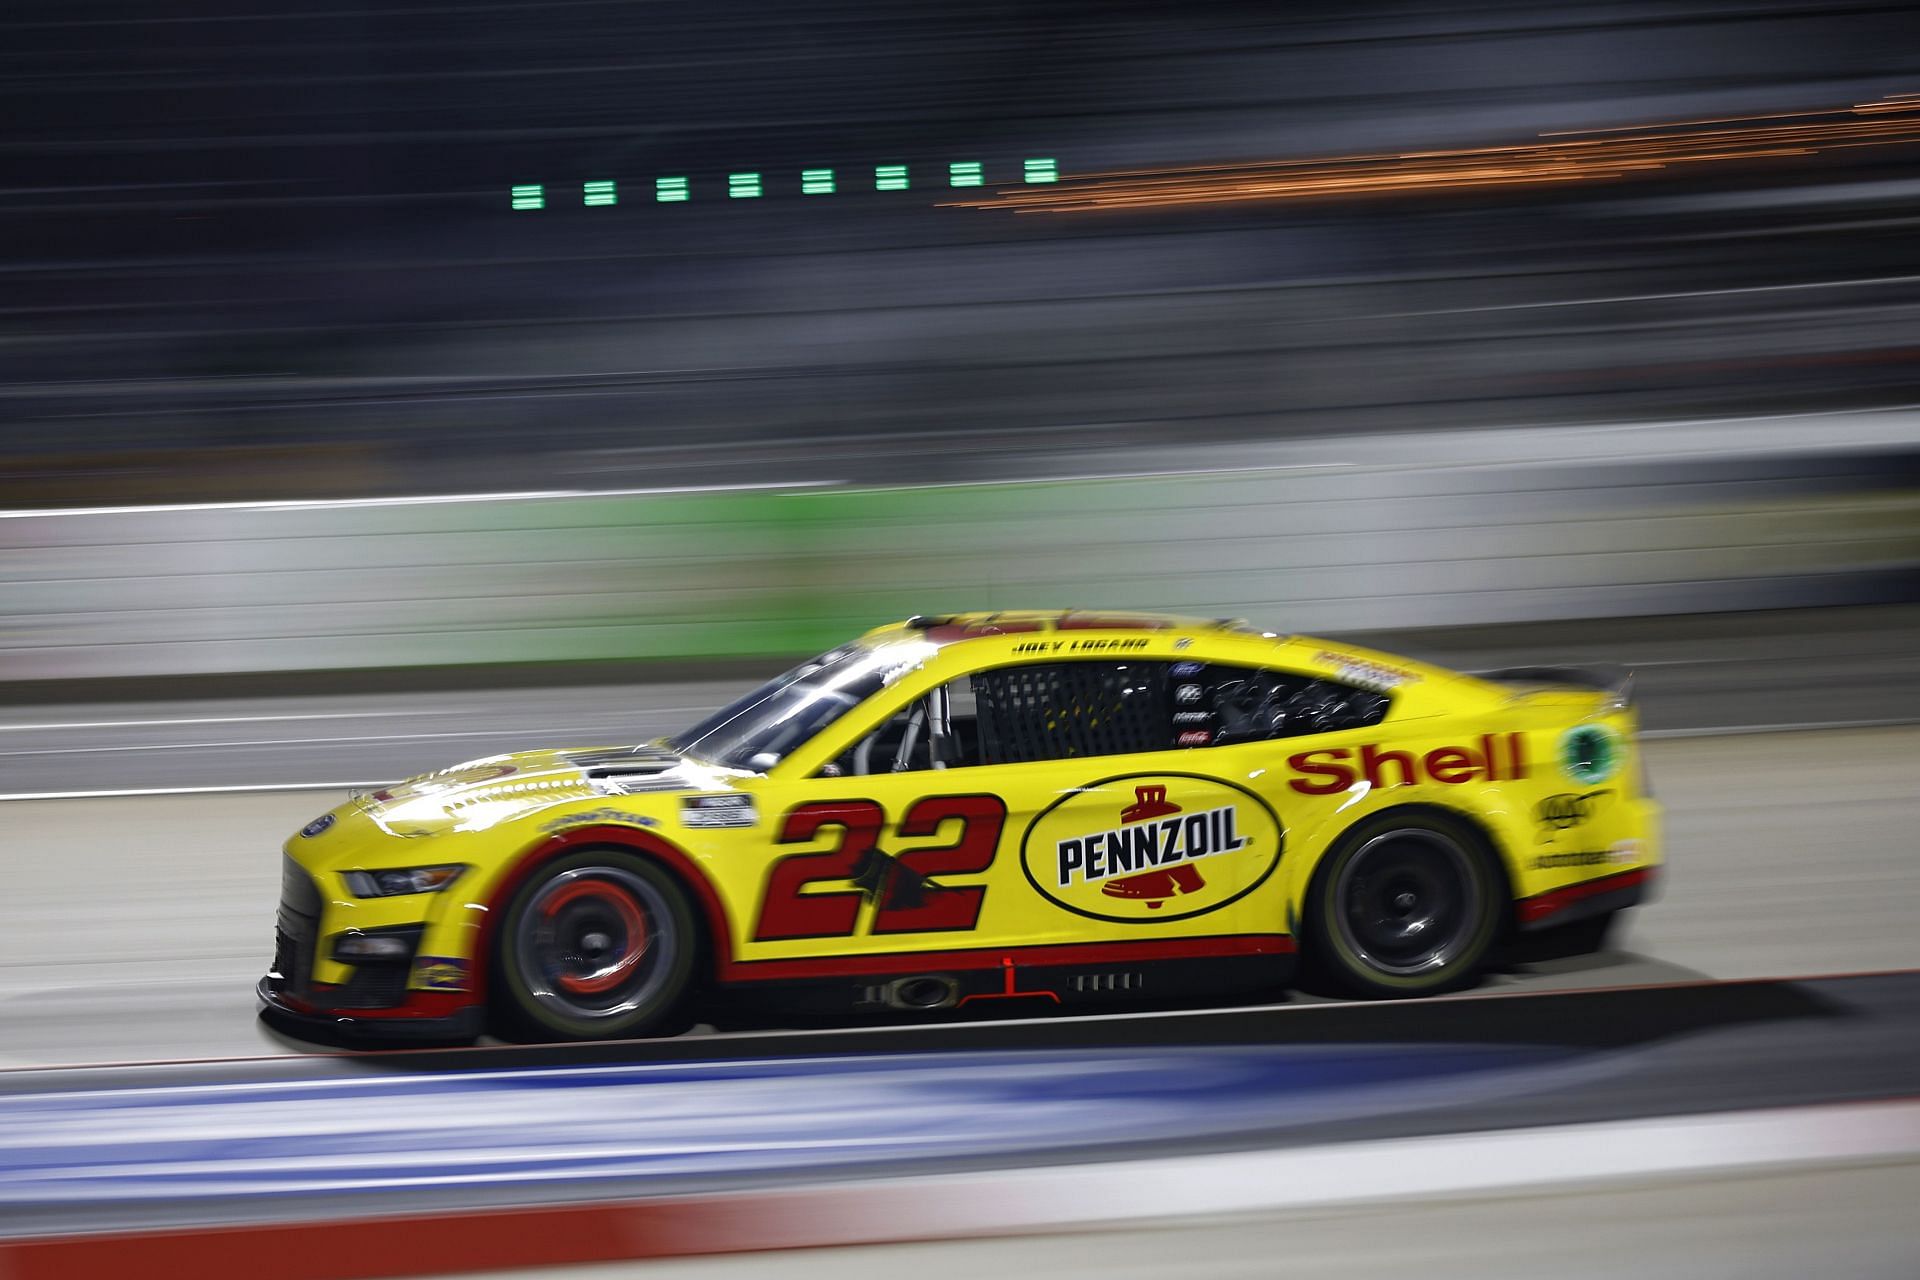 Joey Logano during the 2022 NASCAR Cup Series Blue-Emu Maximum Pain Relief 400 at Martinsville Speedway in Virginia. (Photo by Jared C. Tilton/Getty Images)